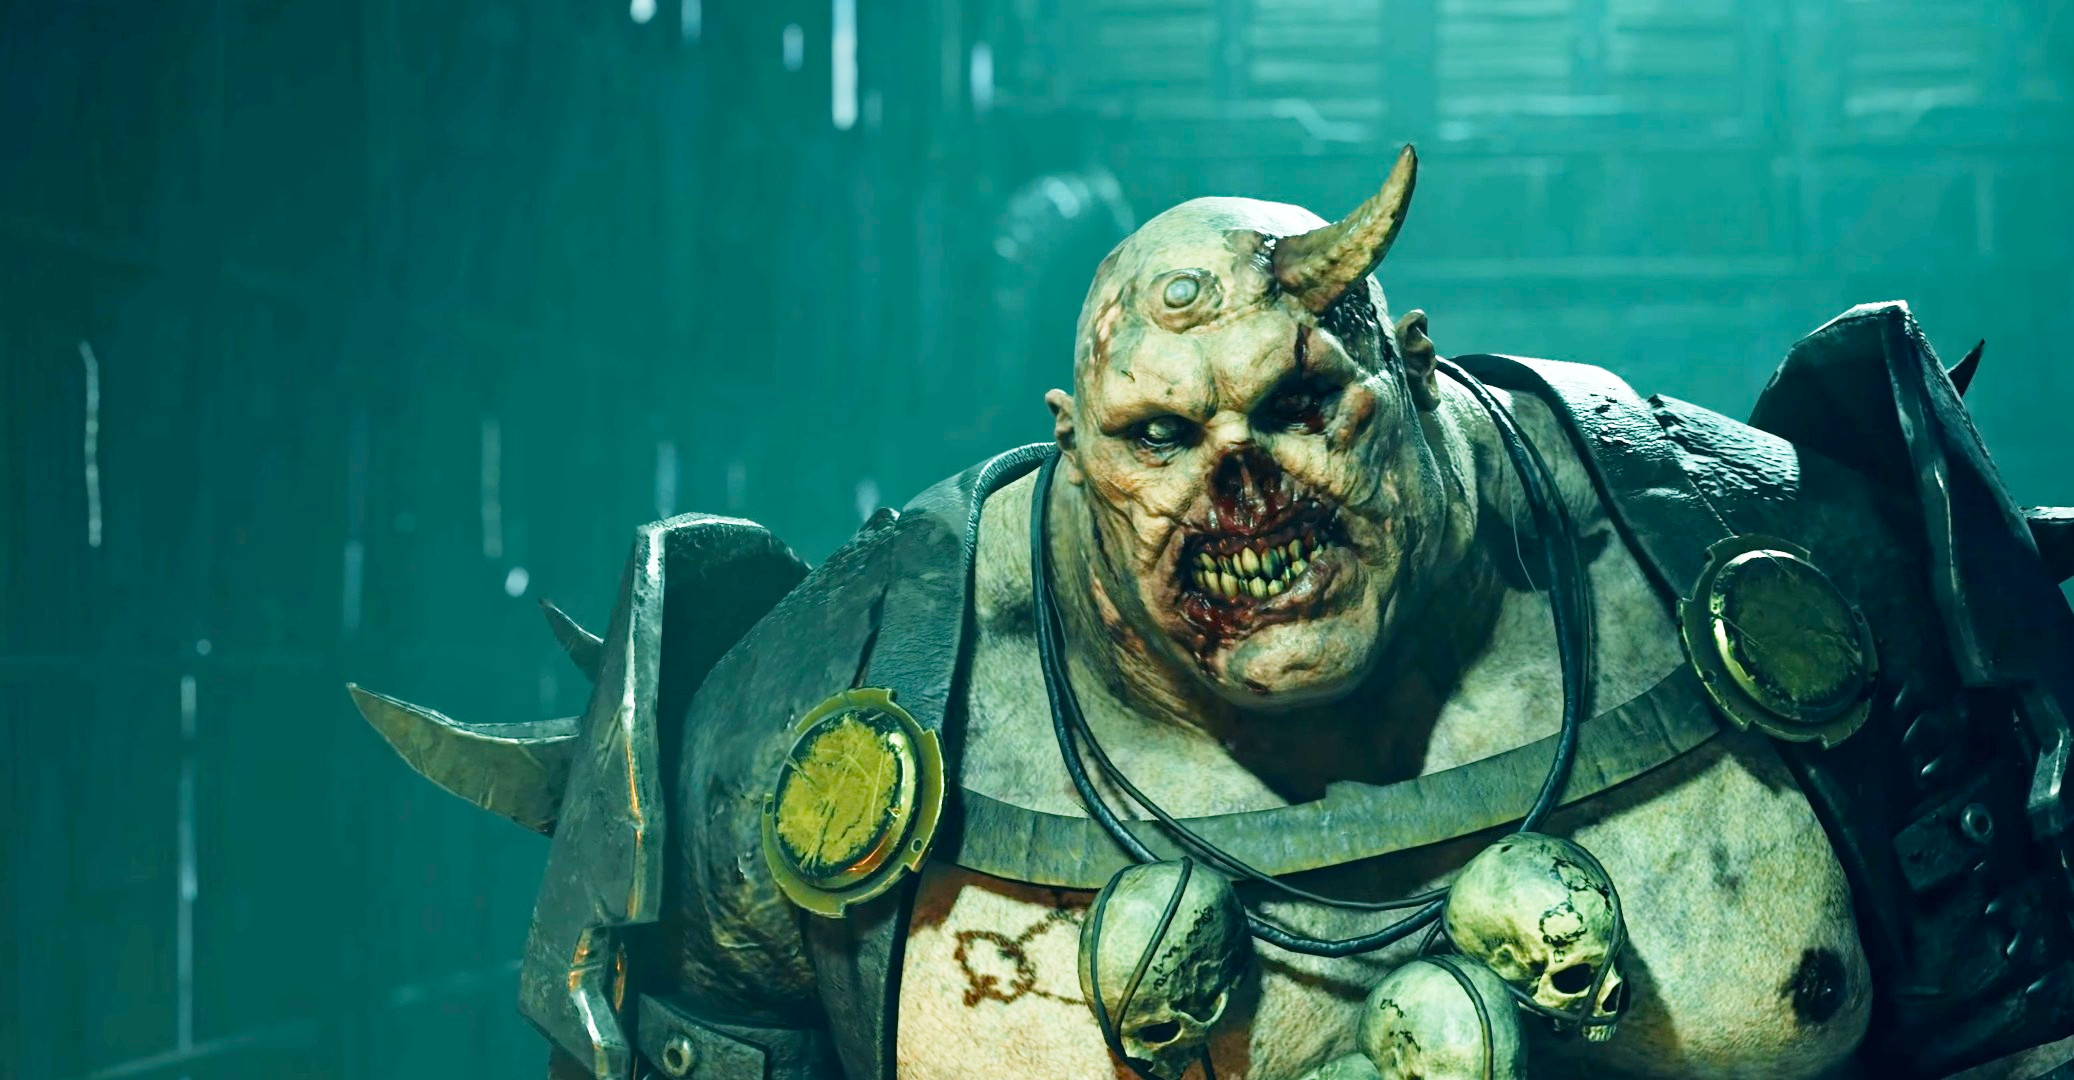 New Warhammer 40k co-op shooter starts beta now on Steam – Like Left 4 Dead in space